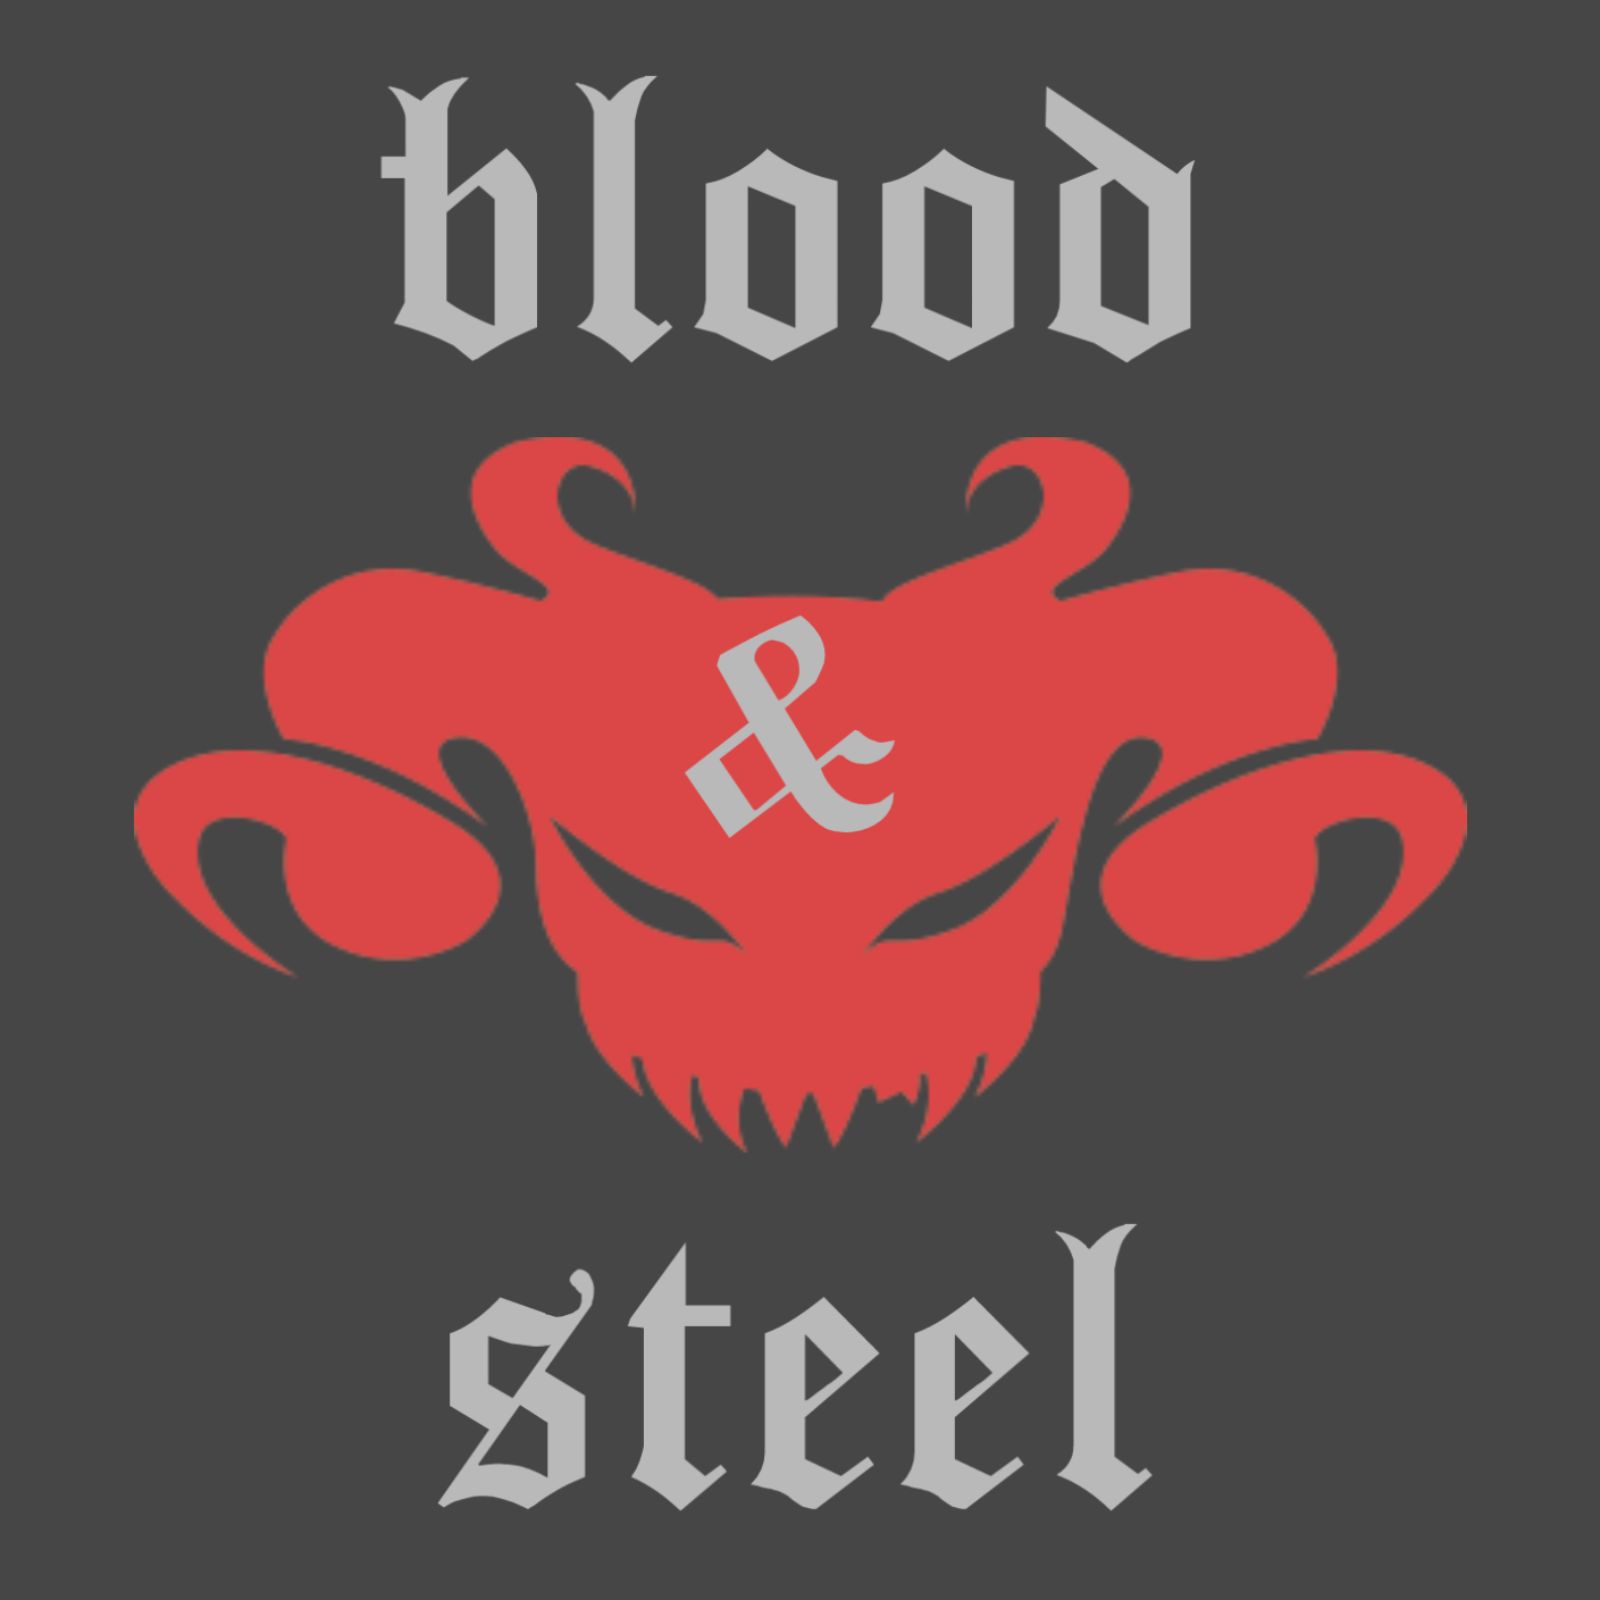 Blood and Steel